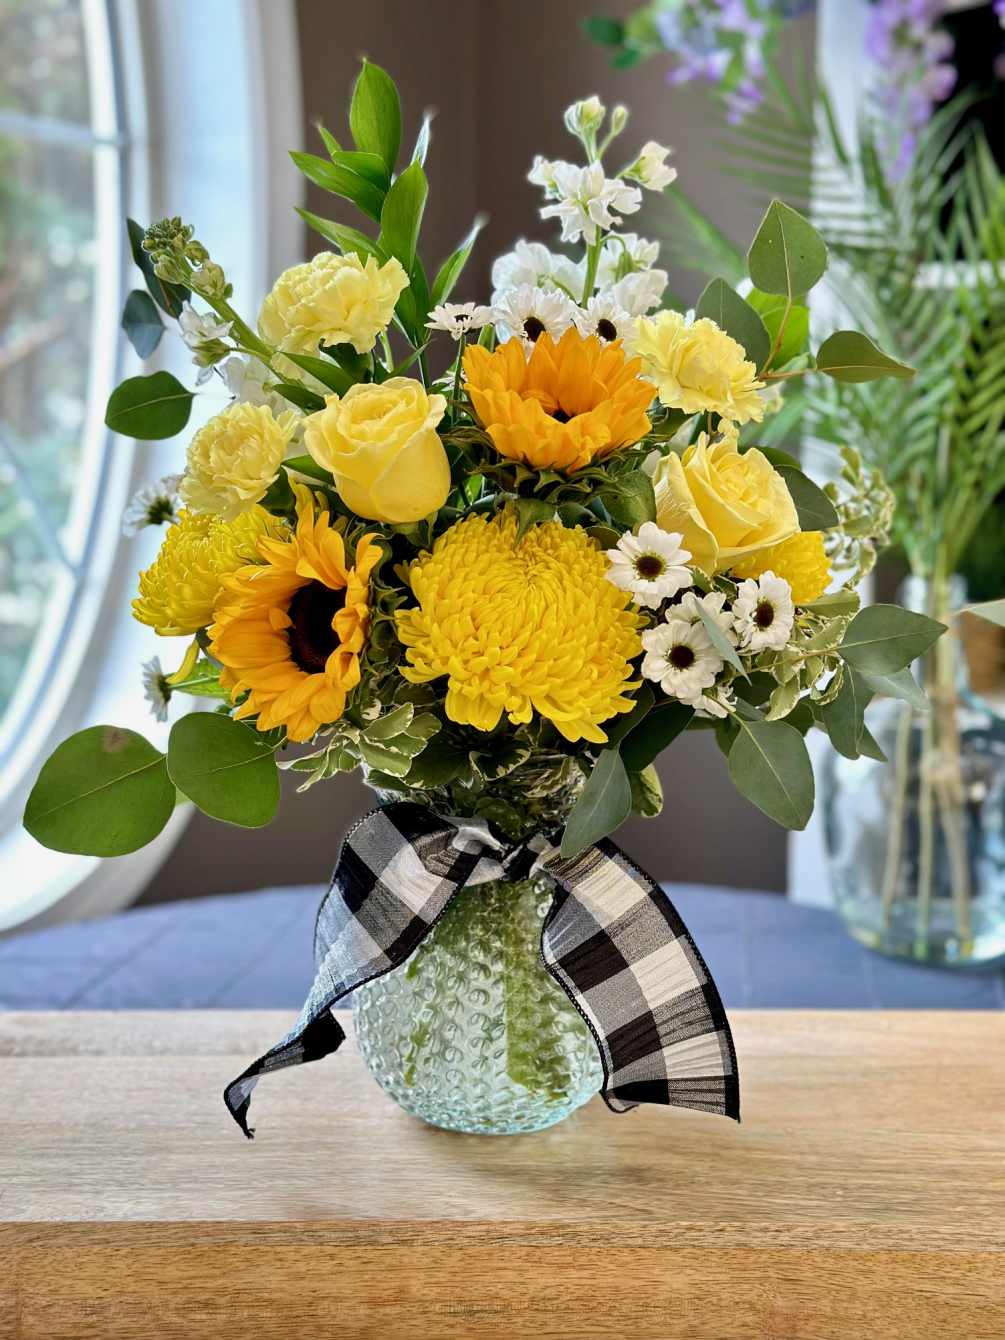 Fresh flowers include; sunflowers, roses, stock, mums, carnations with mixed greenery throughout.